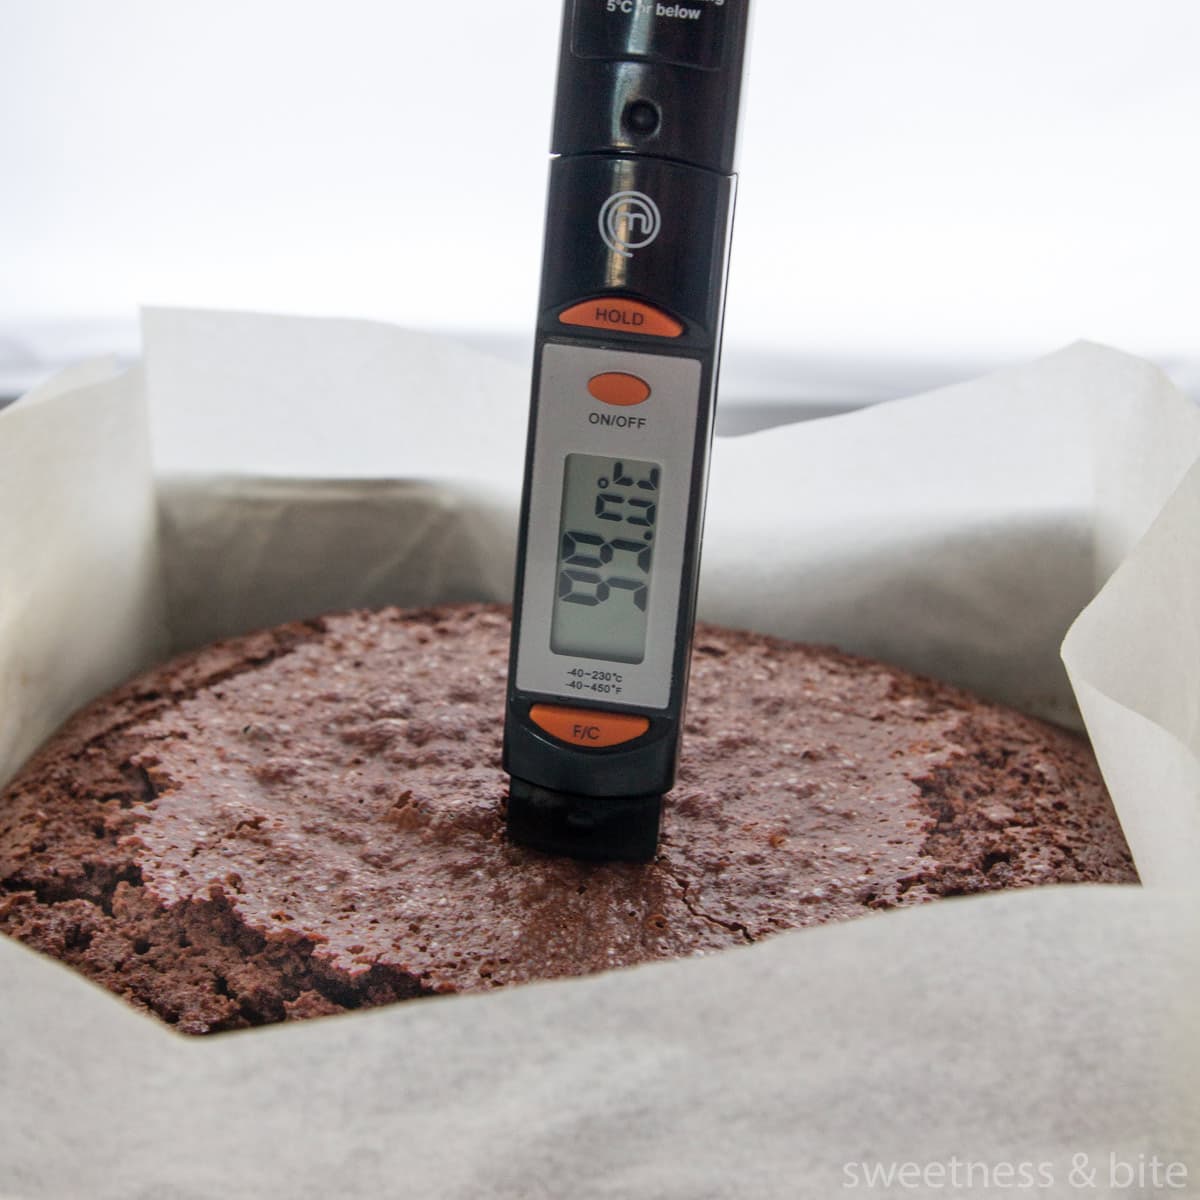 A thermometer being used to check the internal temperature of a cake in Celcius.